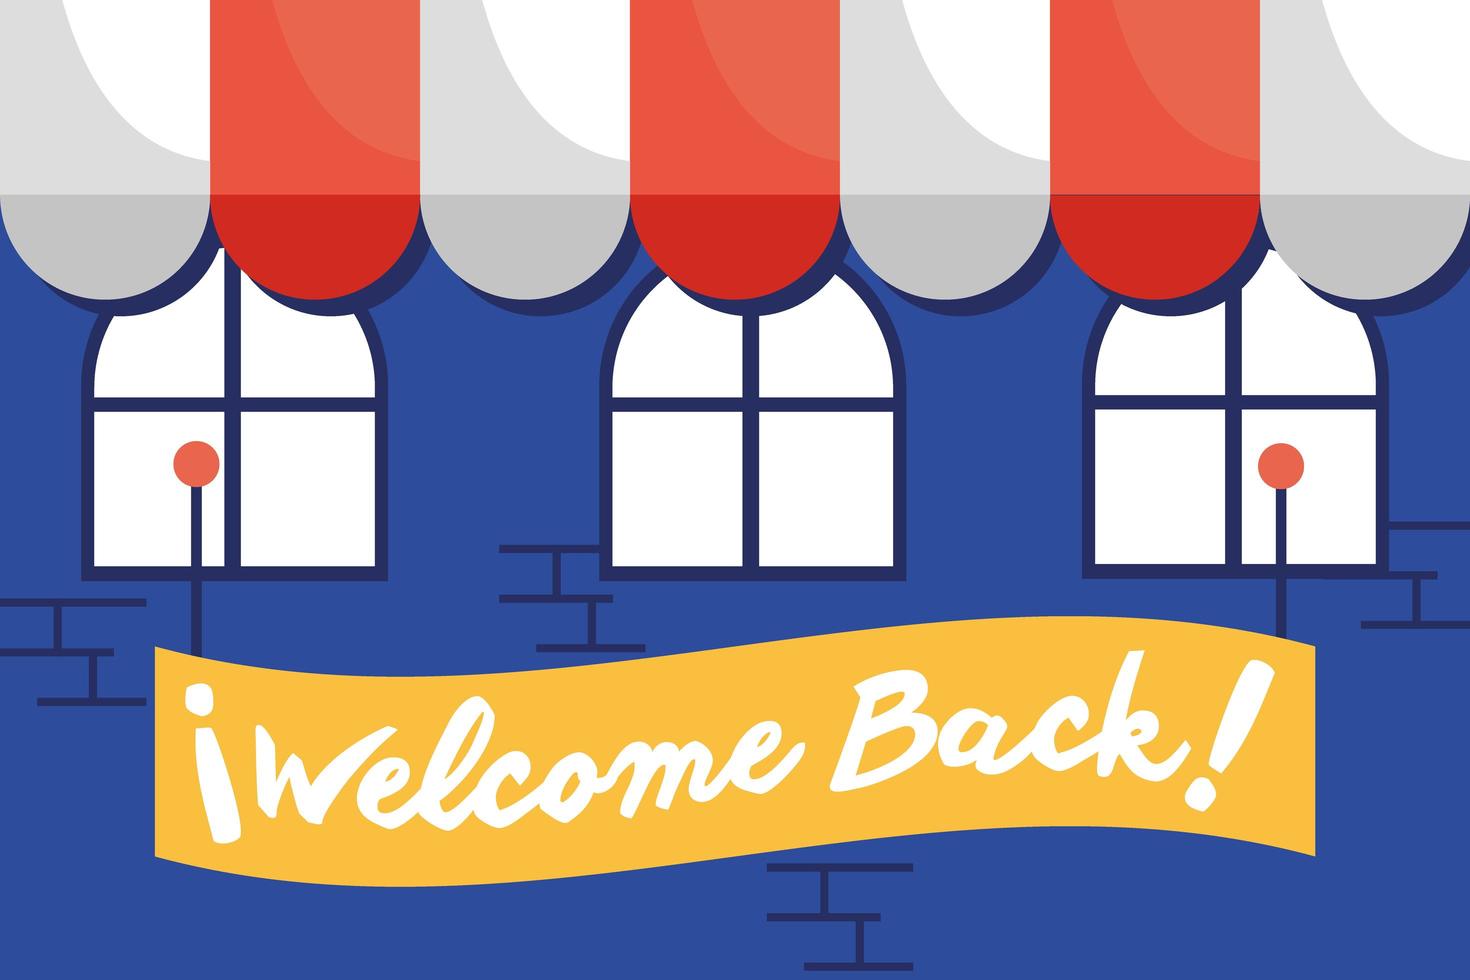 Welcome back, reopening sign hanging in a store front vector